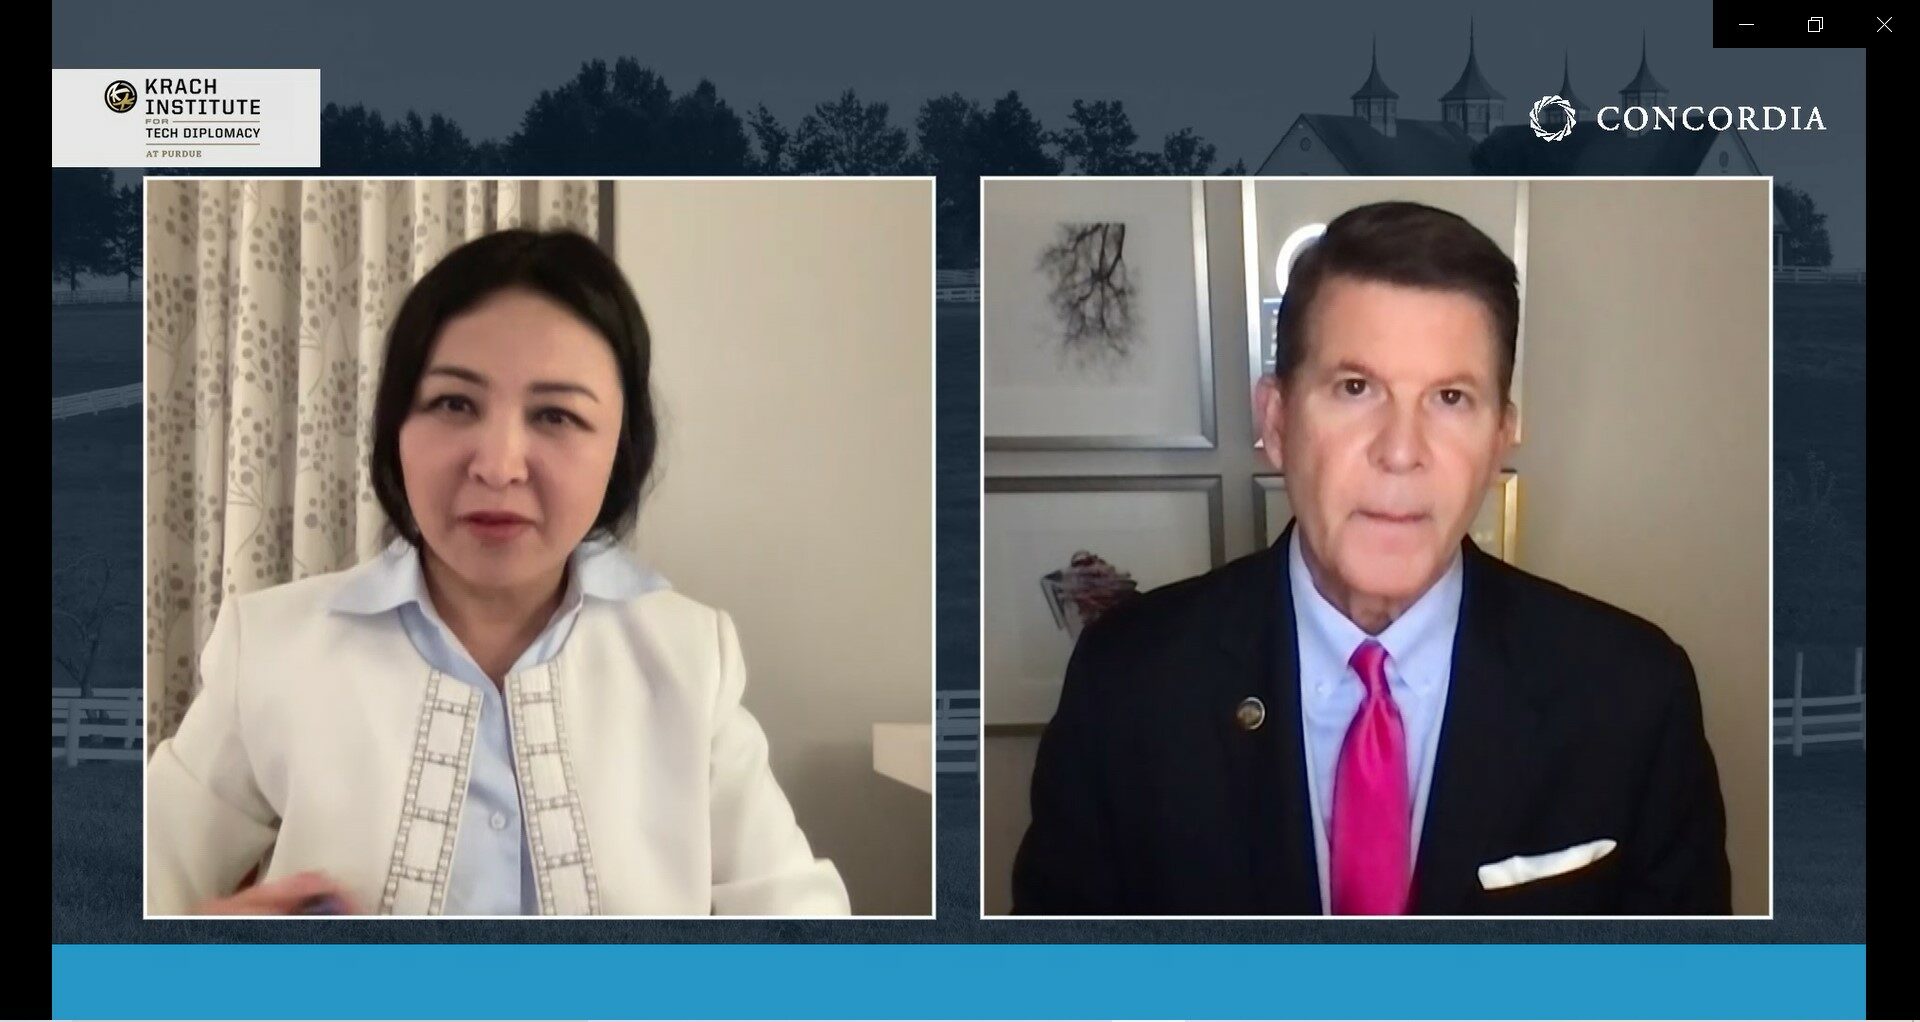 Interview with the Hon. Keith Krach and Natalie Liu of Voice of America